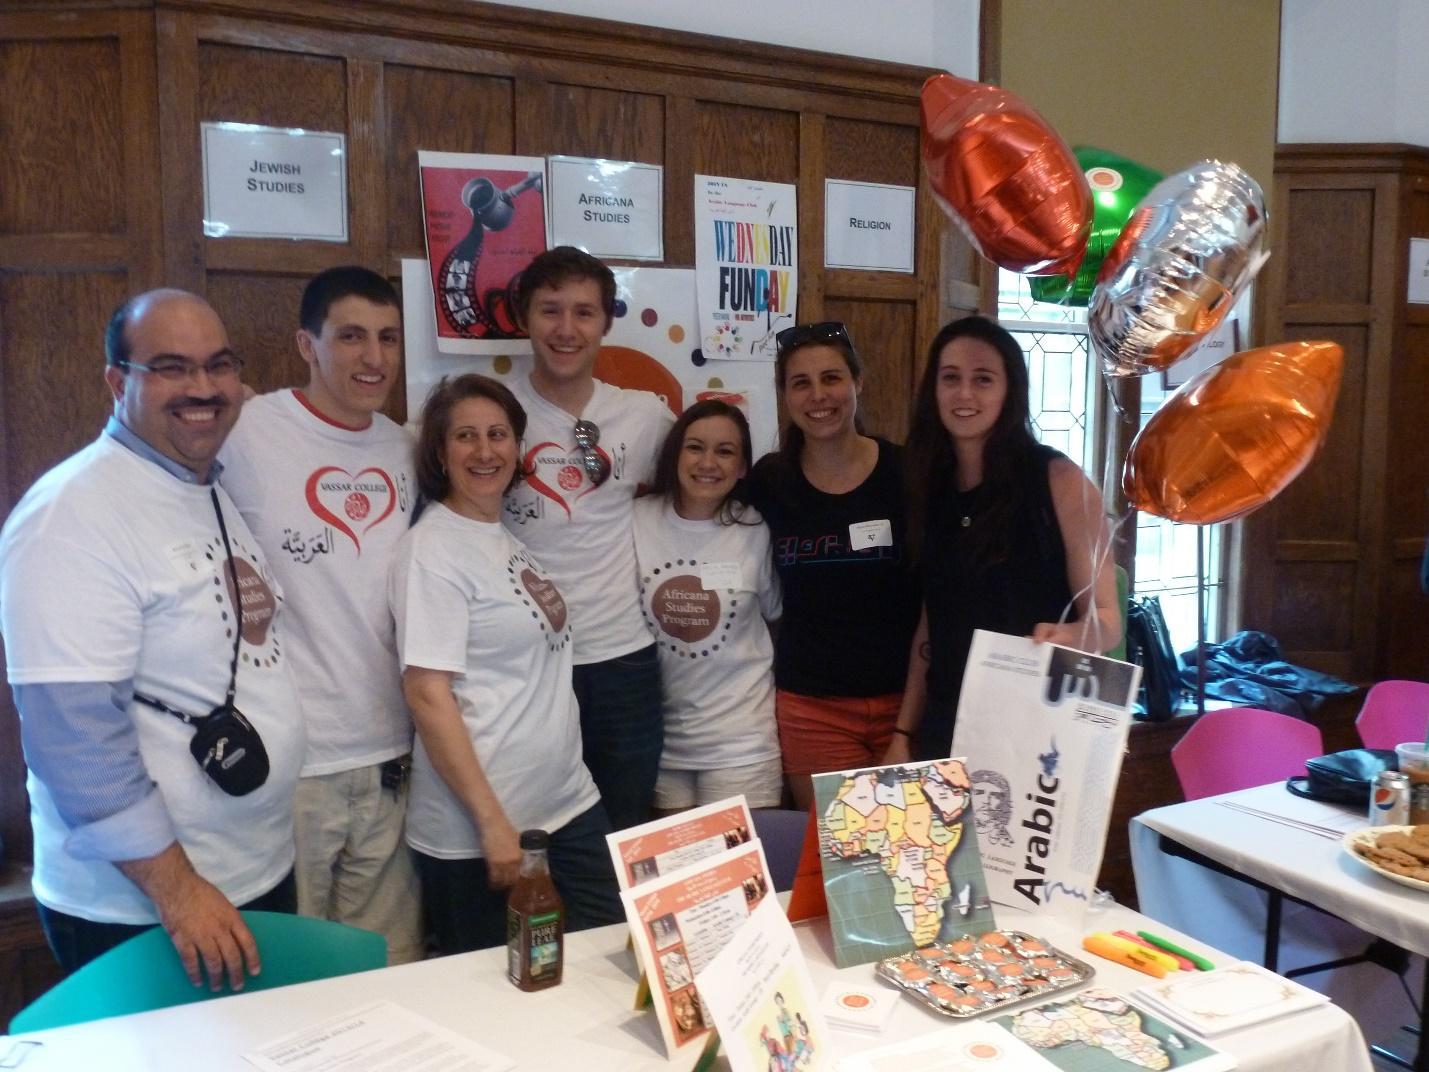 A group of students and faculty stand behind a table with department literature on it, smiling at the camera